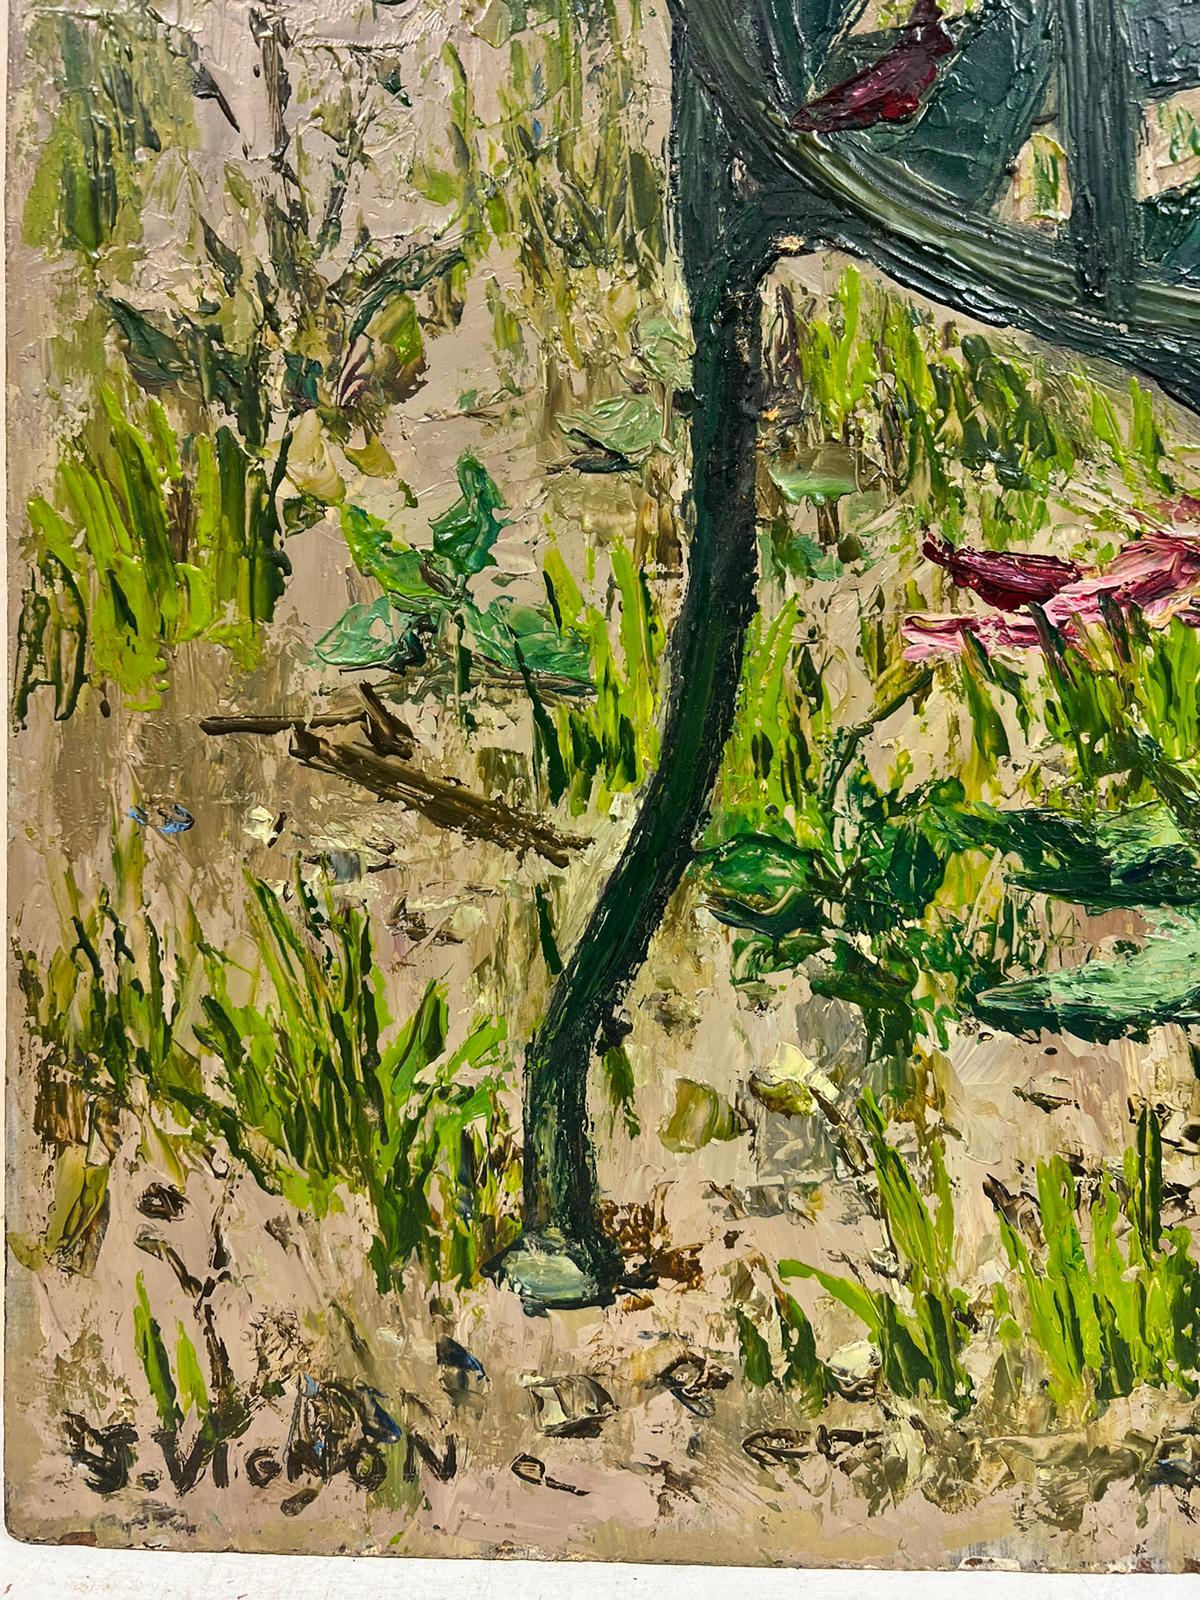 Garden Flowers
by Josine Vignon (French 1922-2022)
signed and stamped verso
oil painting on board, unframed
board: 29 x 21 inches

Colors: Green colors, pink, white and red

Very good condition

Provenance: from the artists estate, France

Josine